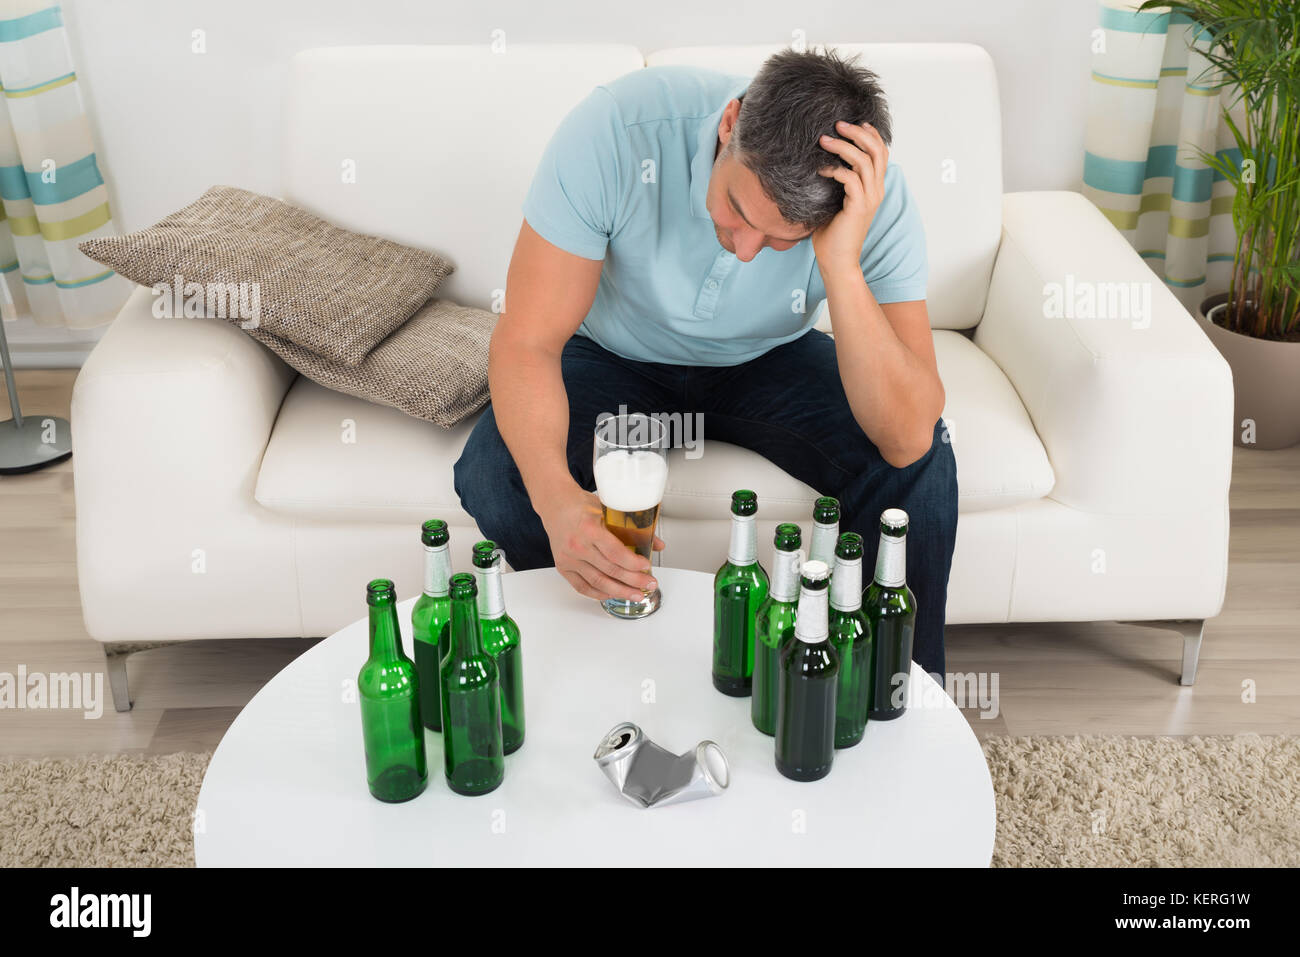 Mature Man Sitting On Sofa In Front Of Bottle Of Beer On Table Stock Photo